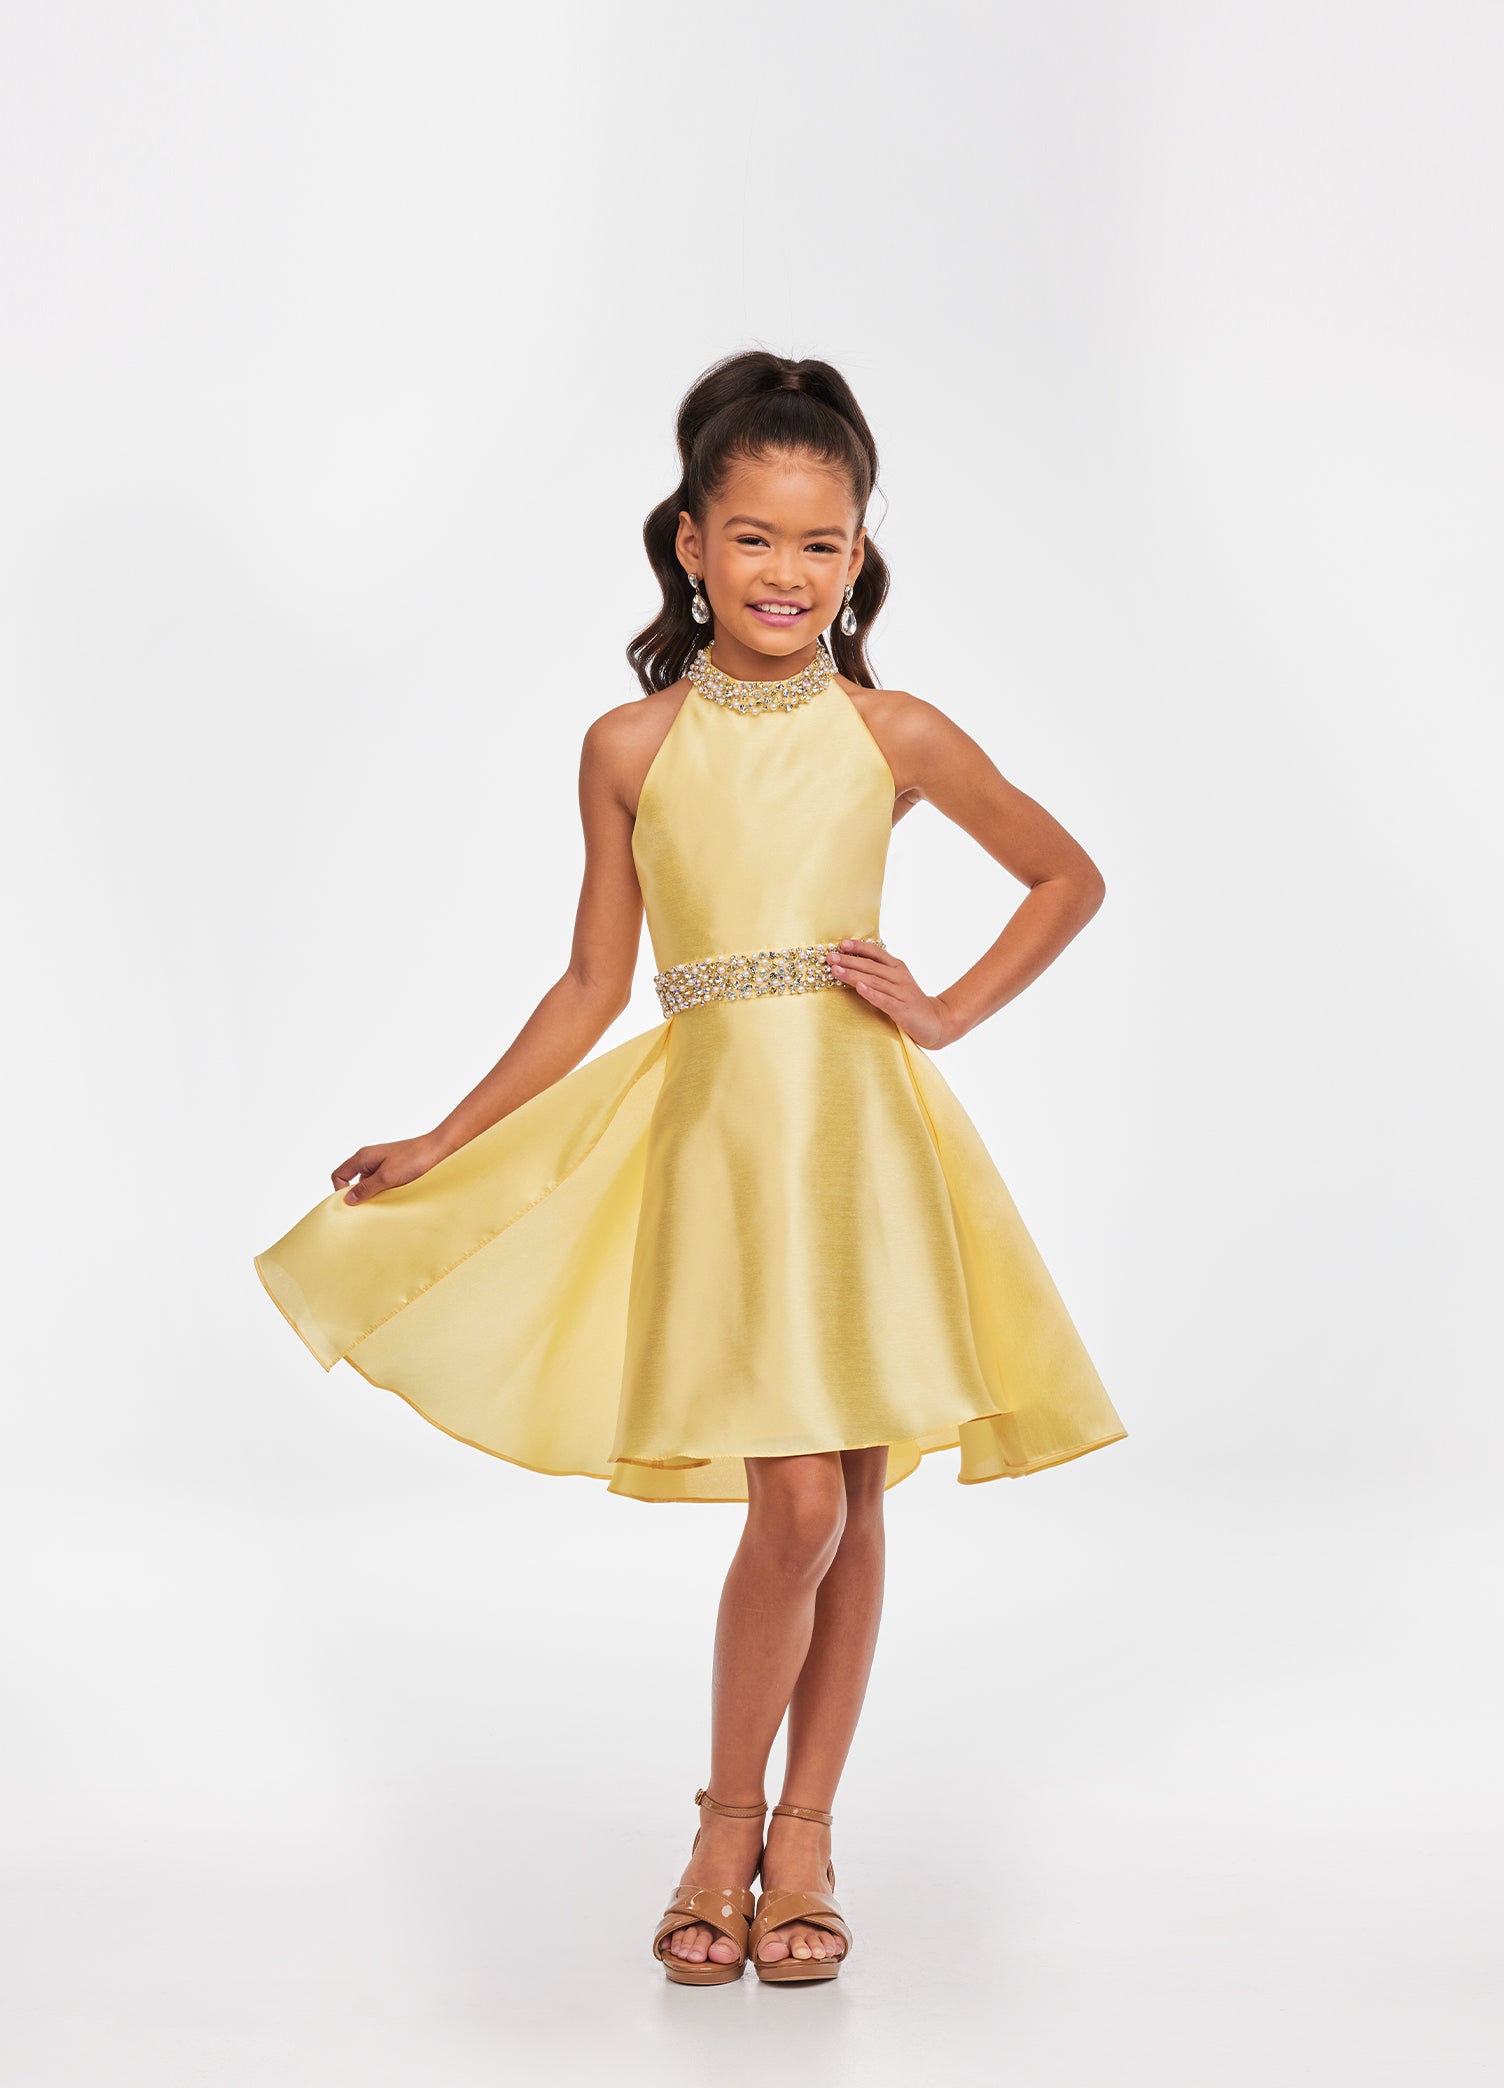 Ashley Lauren Kids 8103 Short Halter cocktail dress with overskirt Pageant Wear Stunning kids mikado cocktail dress featuring a crystal and pearl neckline and waist. The slight a-line skirt is completed with an overskirt for extra flare. Halter Neckline Crystal Beaded Neck & Belt A-Line Skirt Overlay Available Sizes: 4-16 Available Colors: Sky, White, Yellow, Orchid